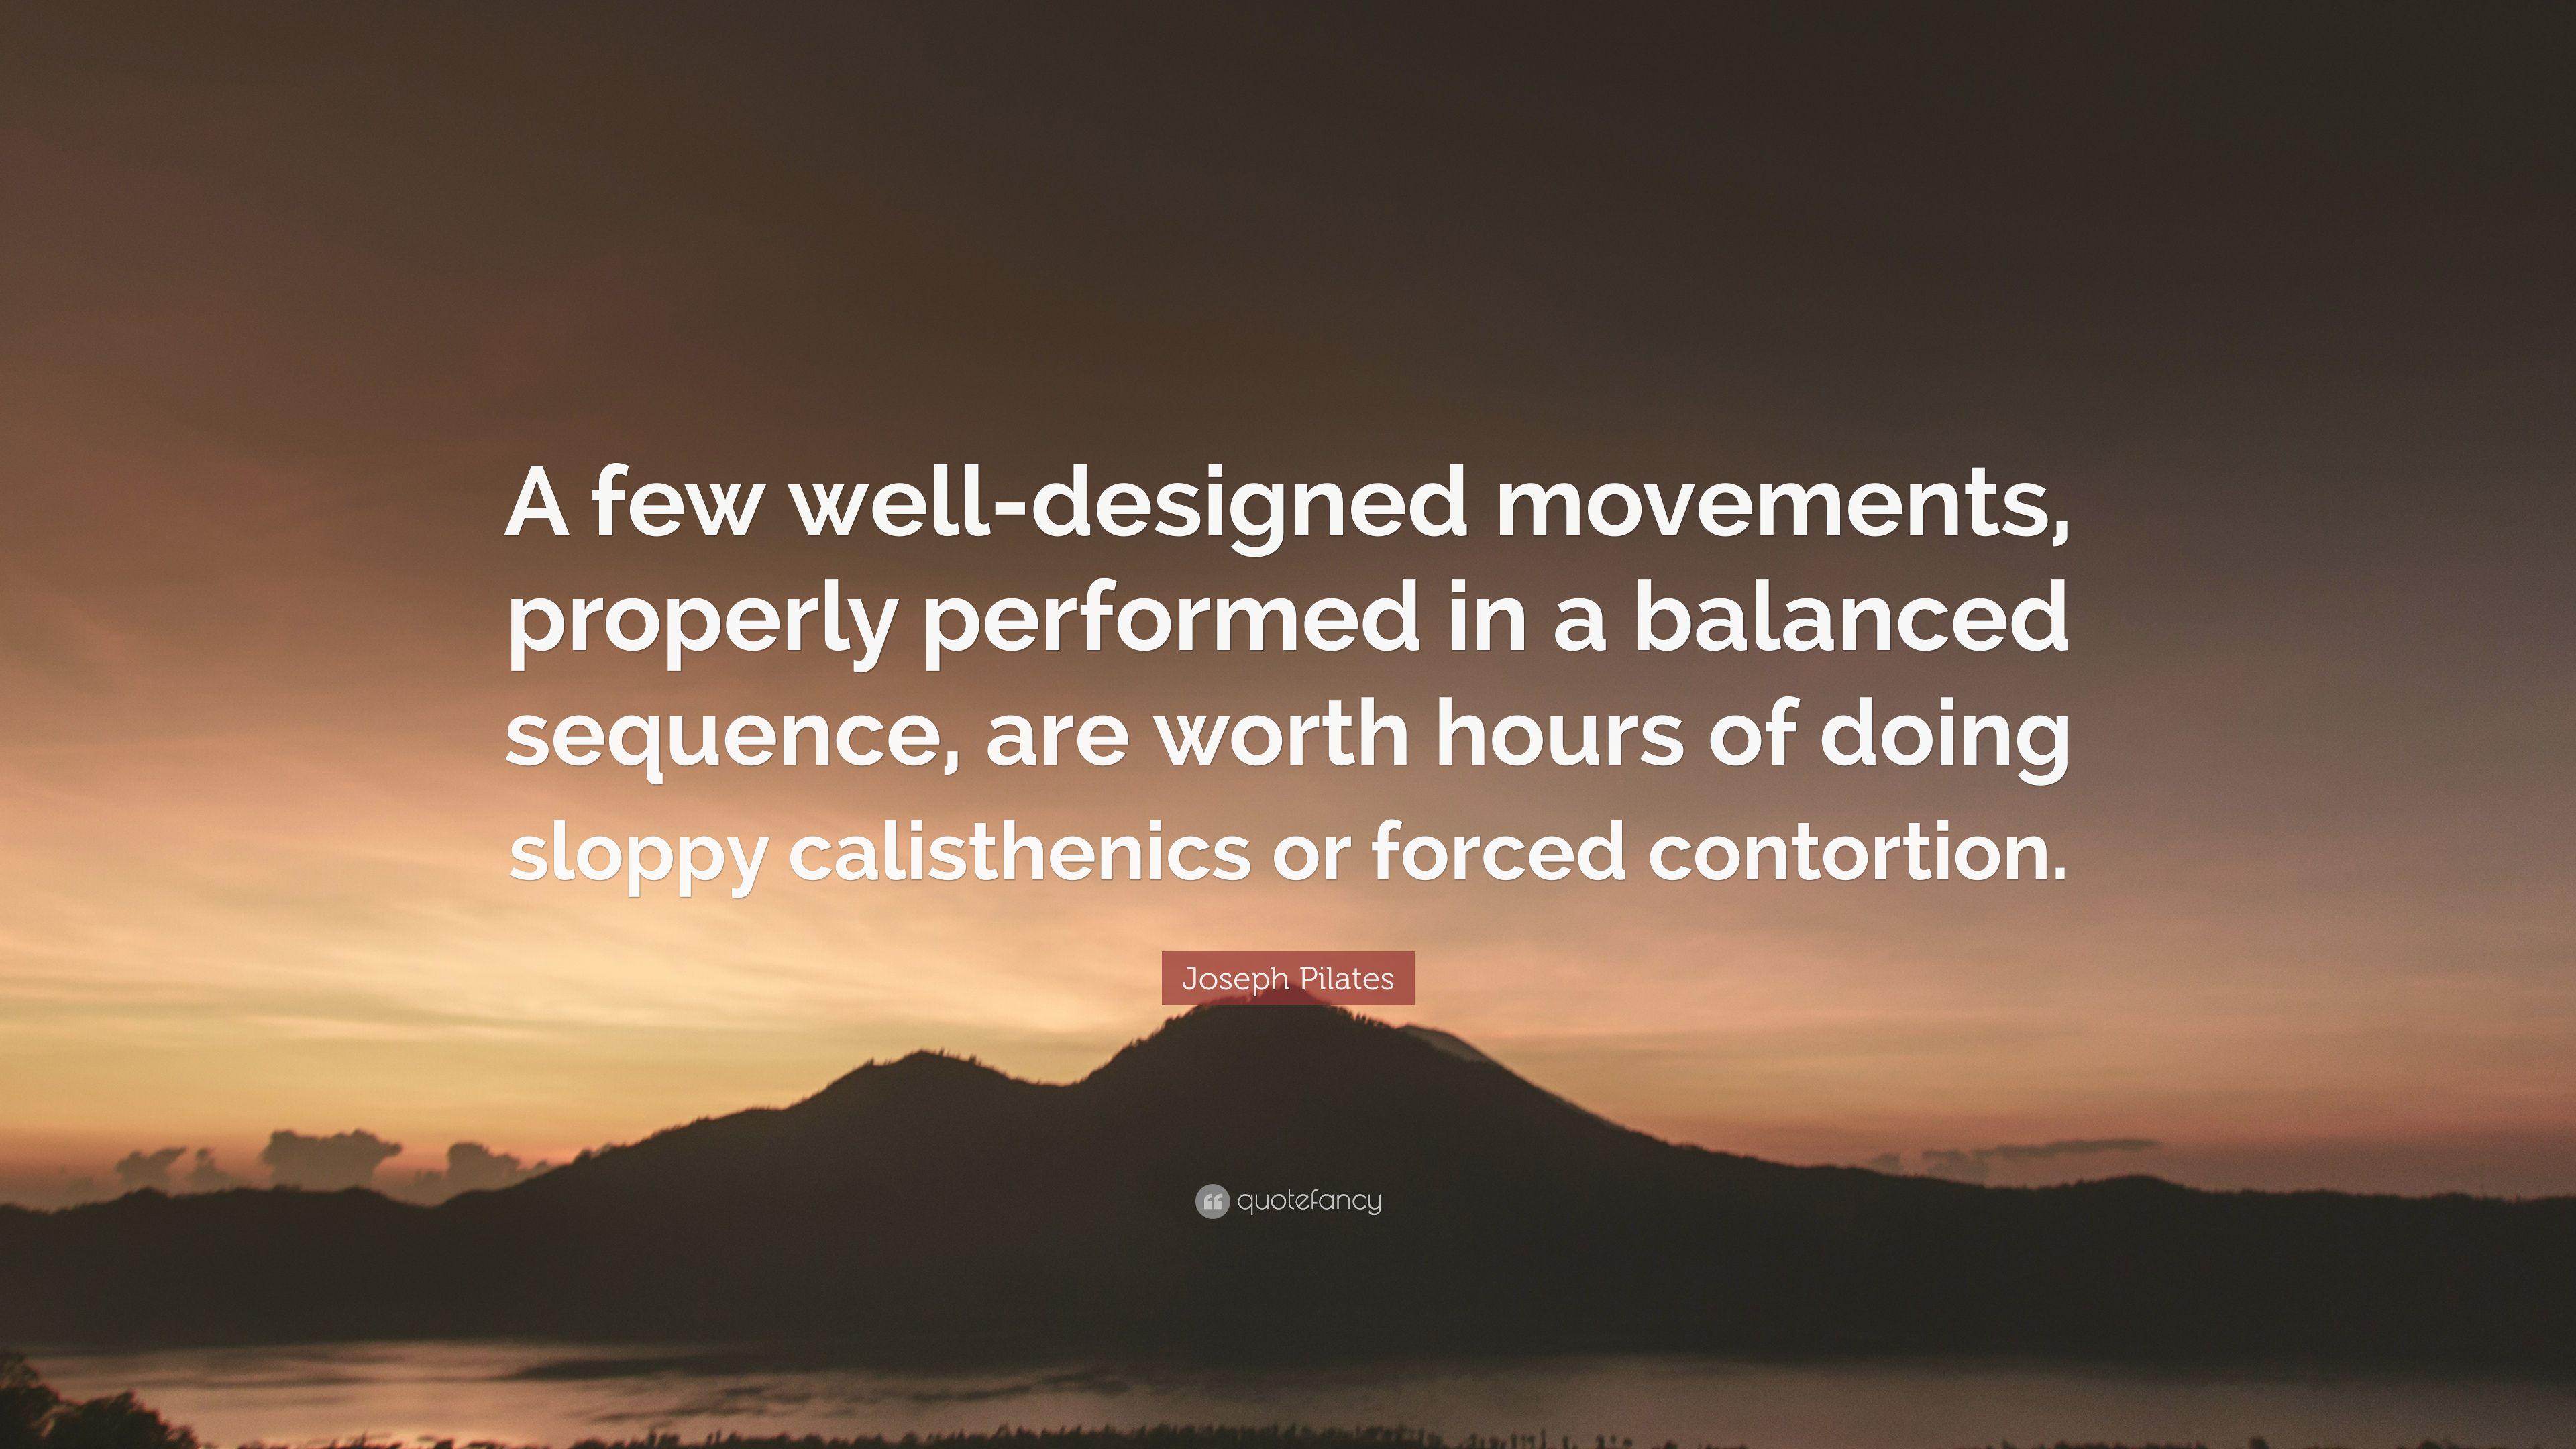 Joseph Pilates Quote: “A Few Well Designed Movements, Properly